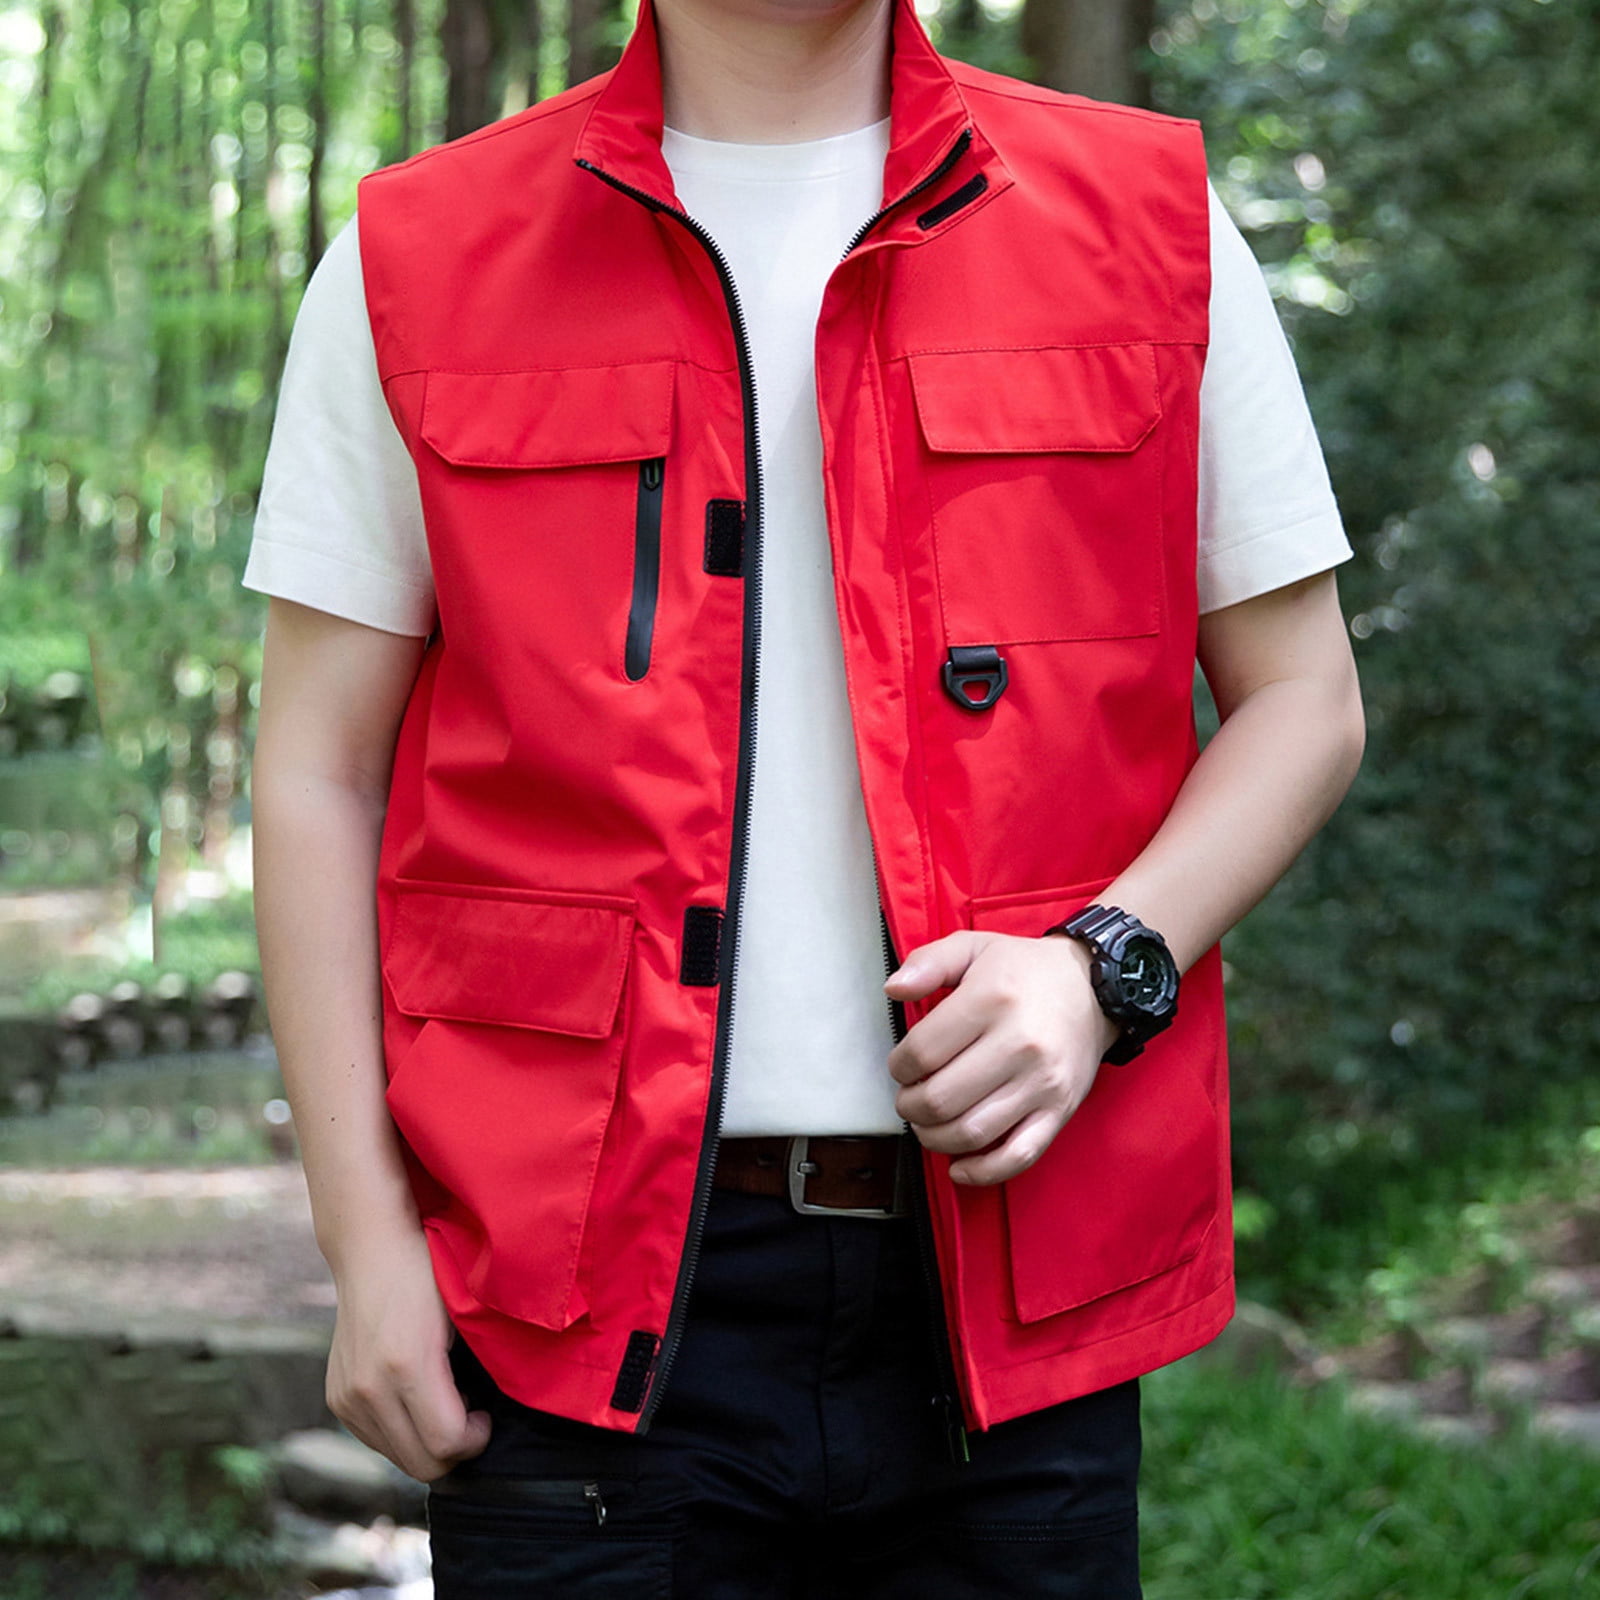 Wyongtao Black and Friday Deals Men's Fishing Vest Quick-drying Summer  Outdoor Lightweight Work Photo Vest with Pockets Red M